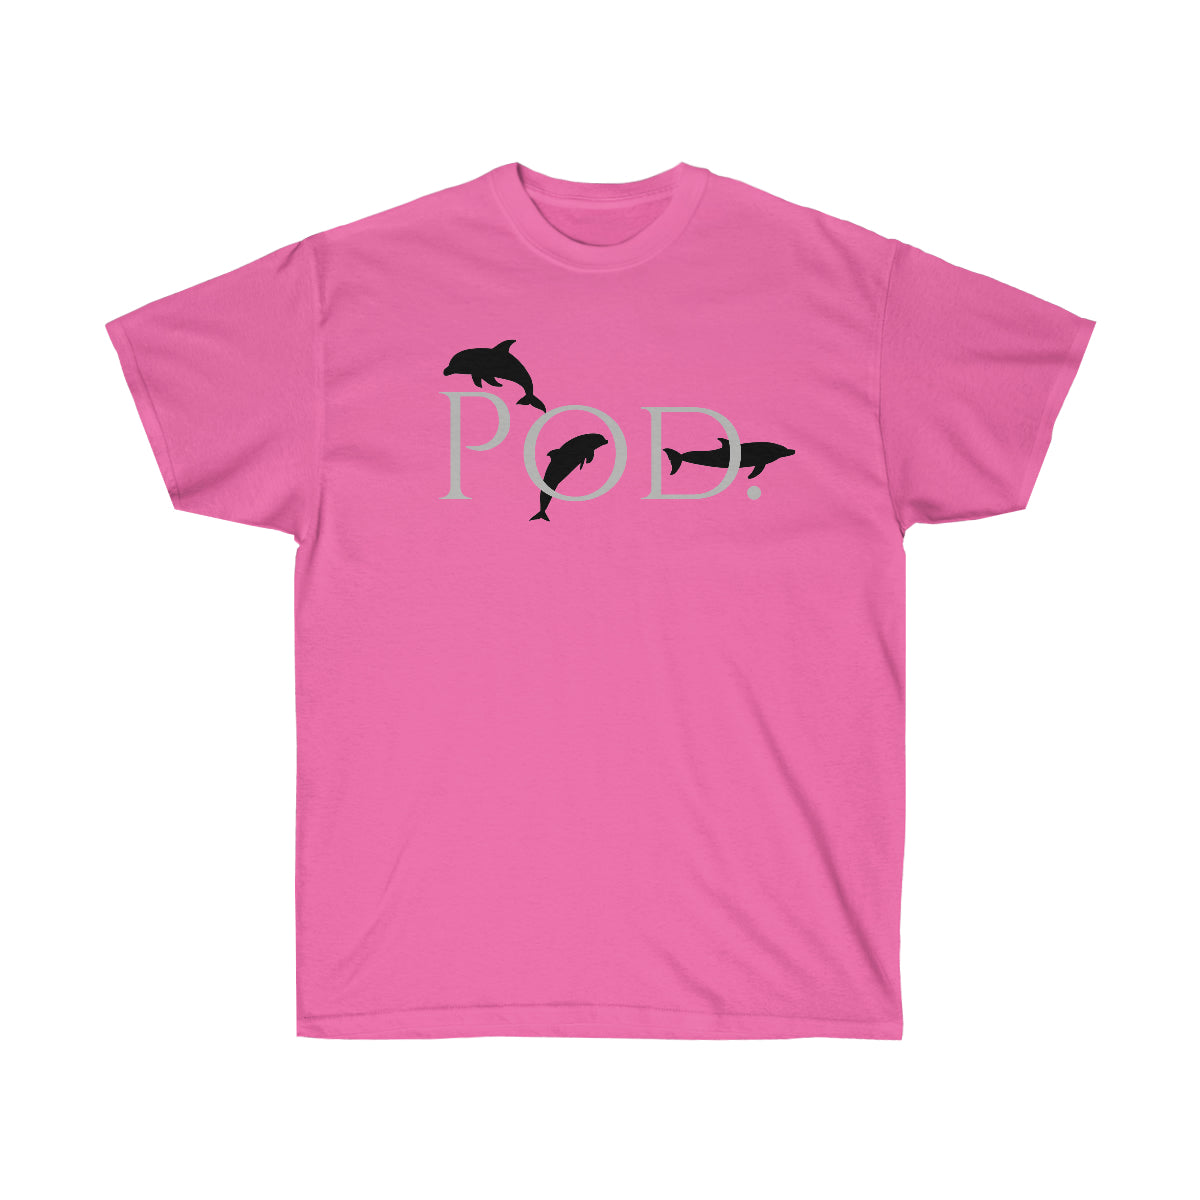 Pod of Dolphins T-shirt